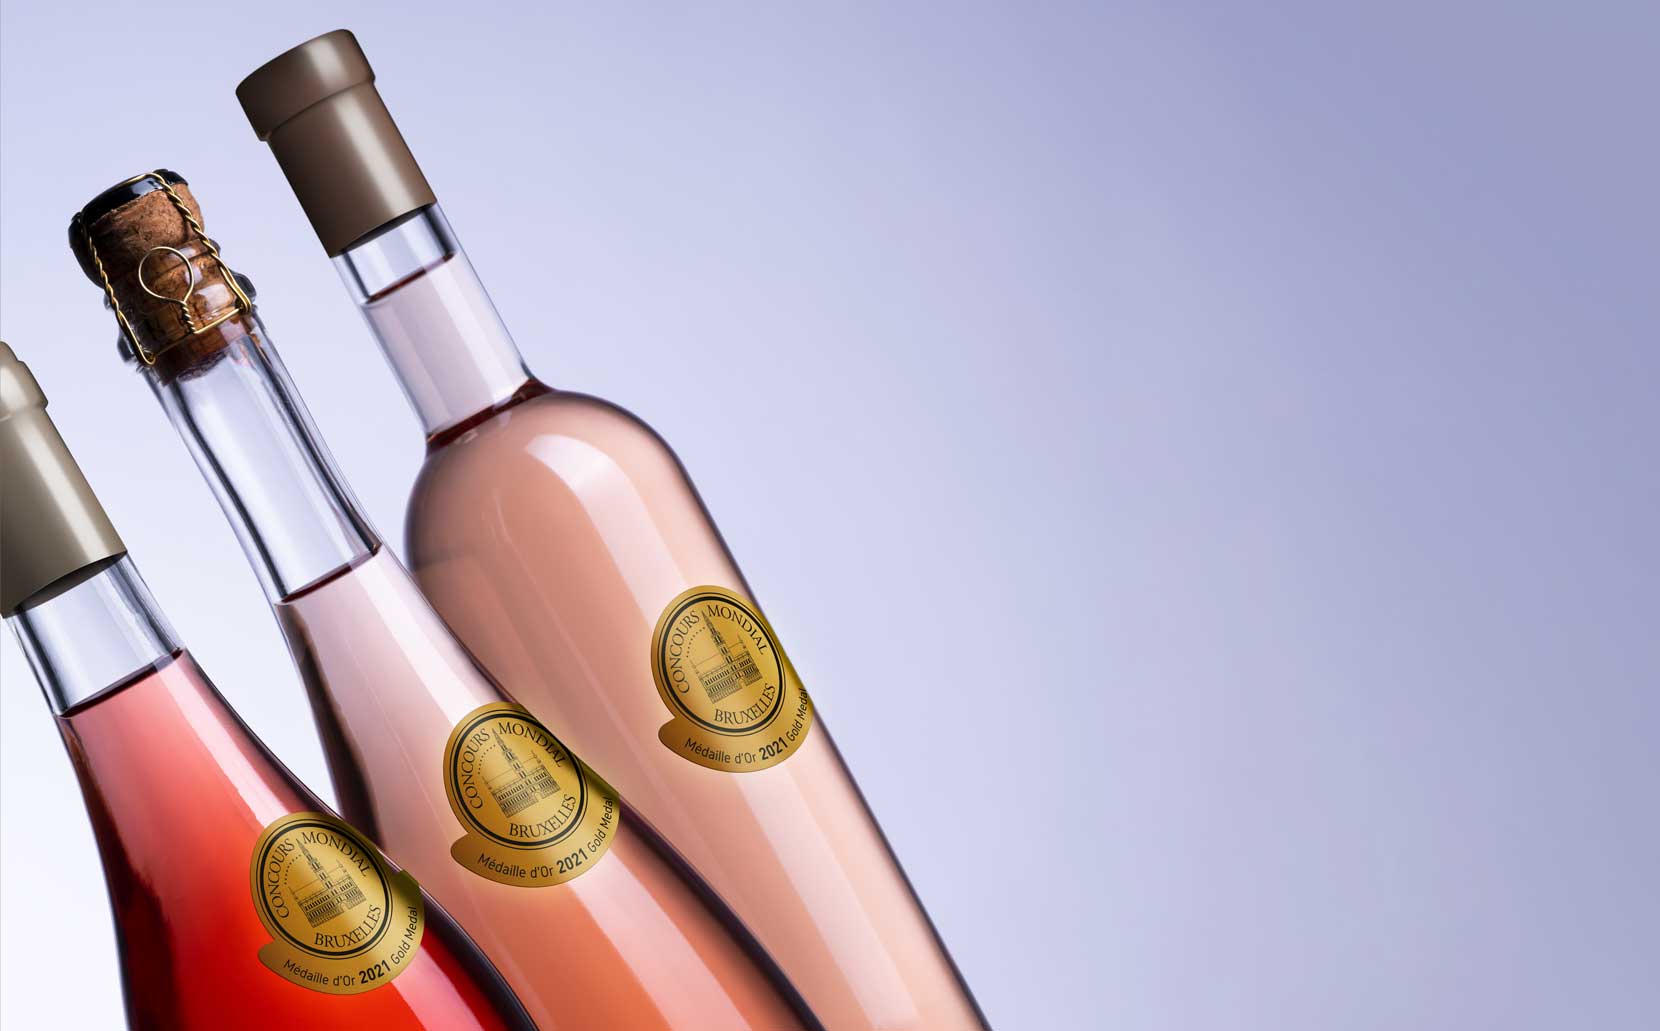 Rosé Wine Session : registrations are open